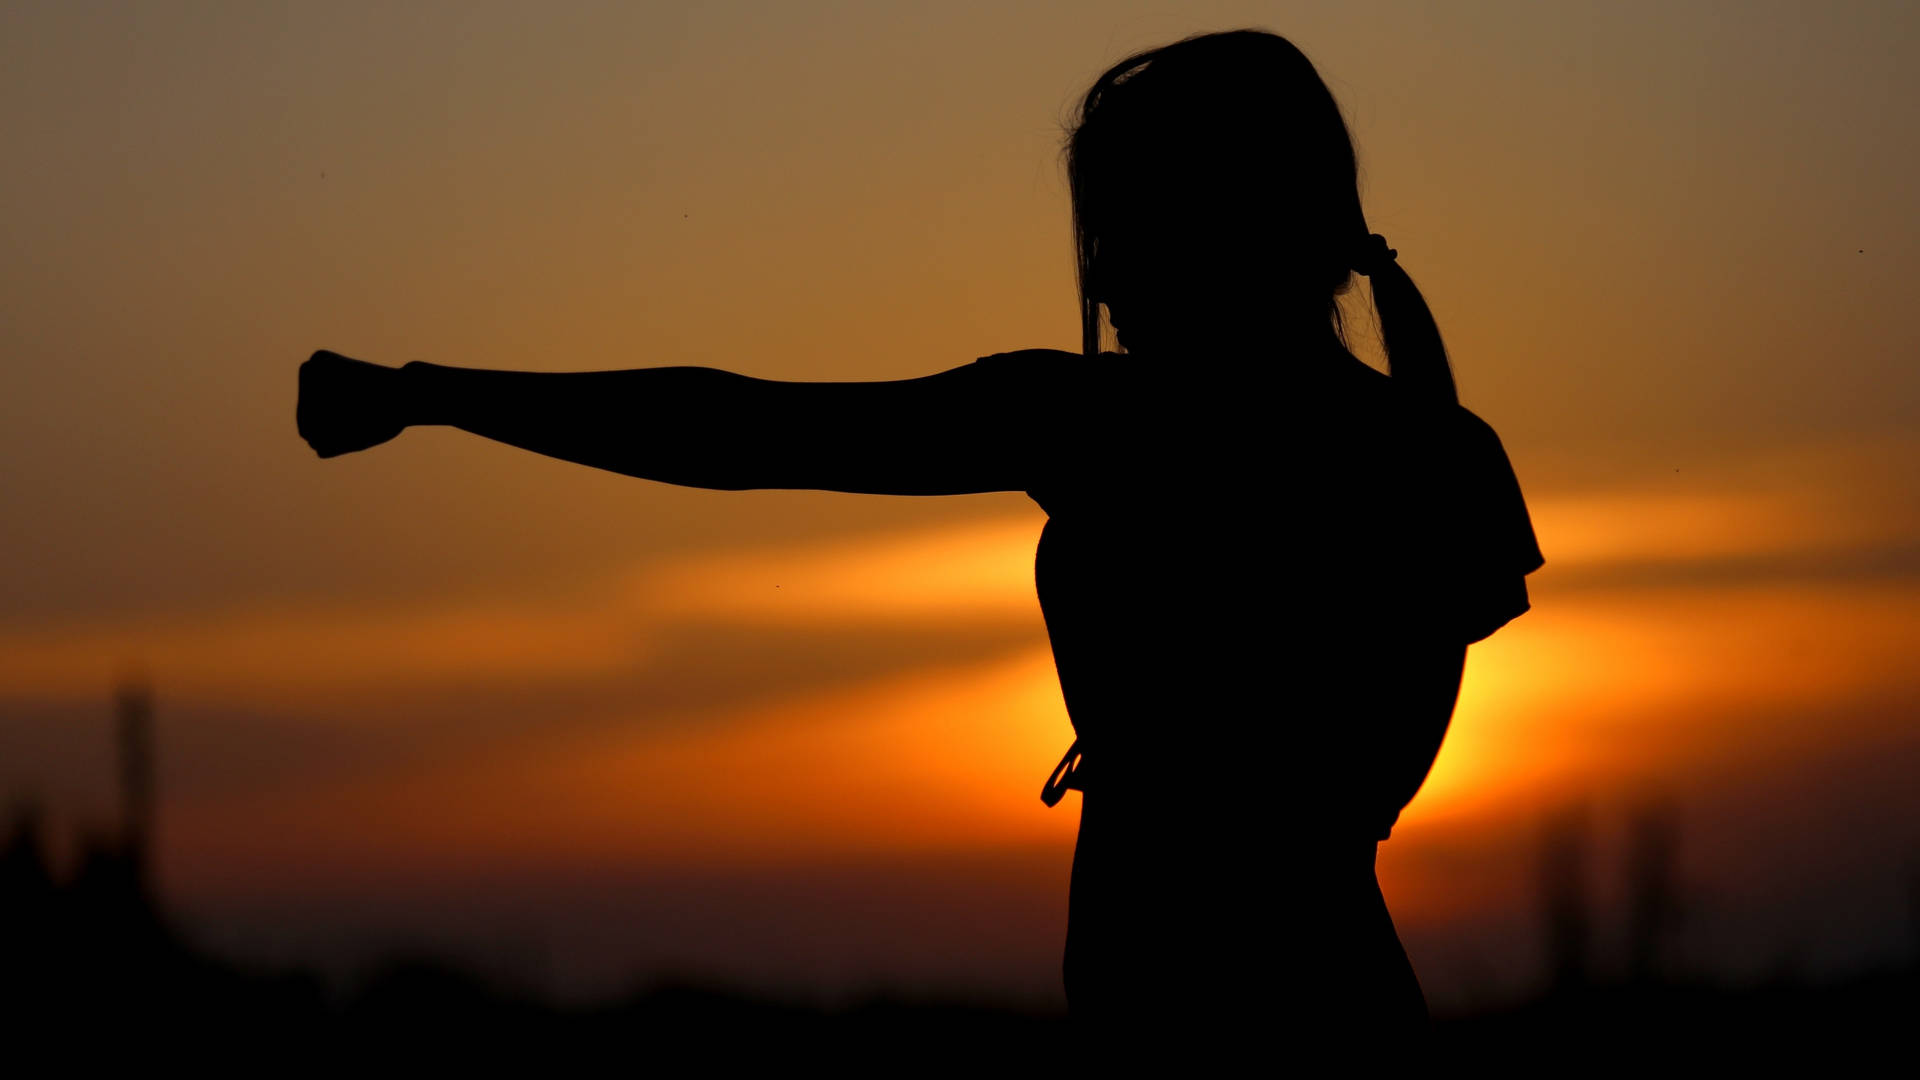 Woman Silhouette Doing Boxing Exercise Wallpaper